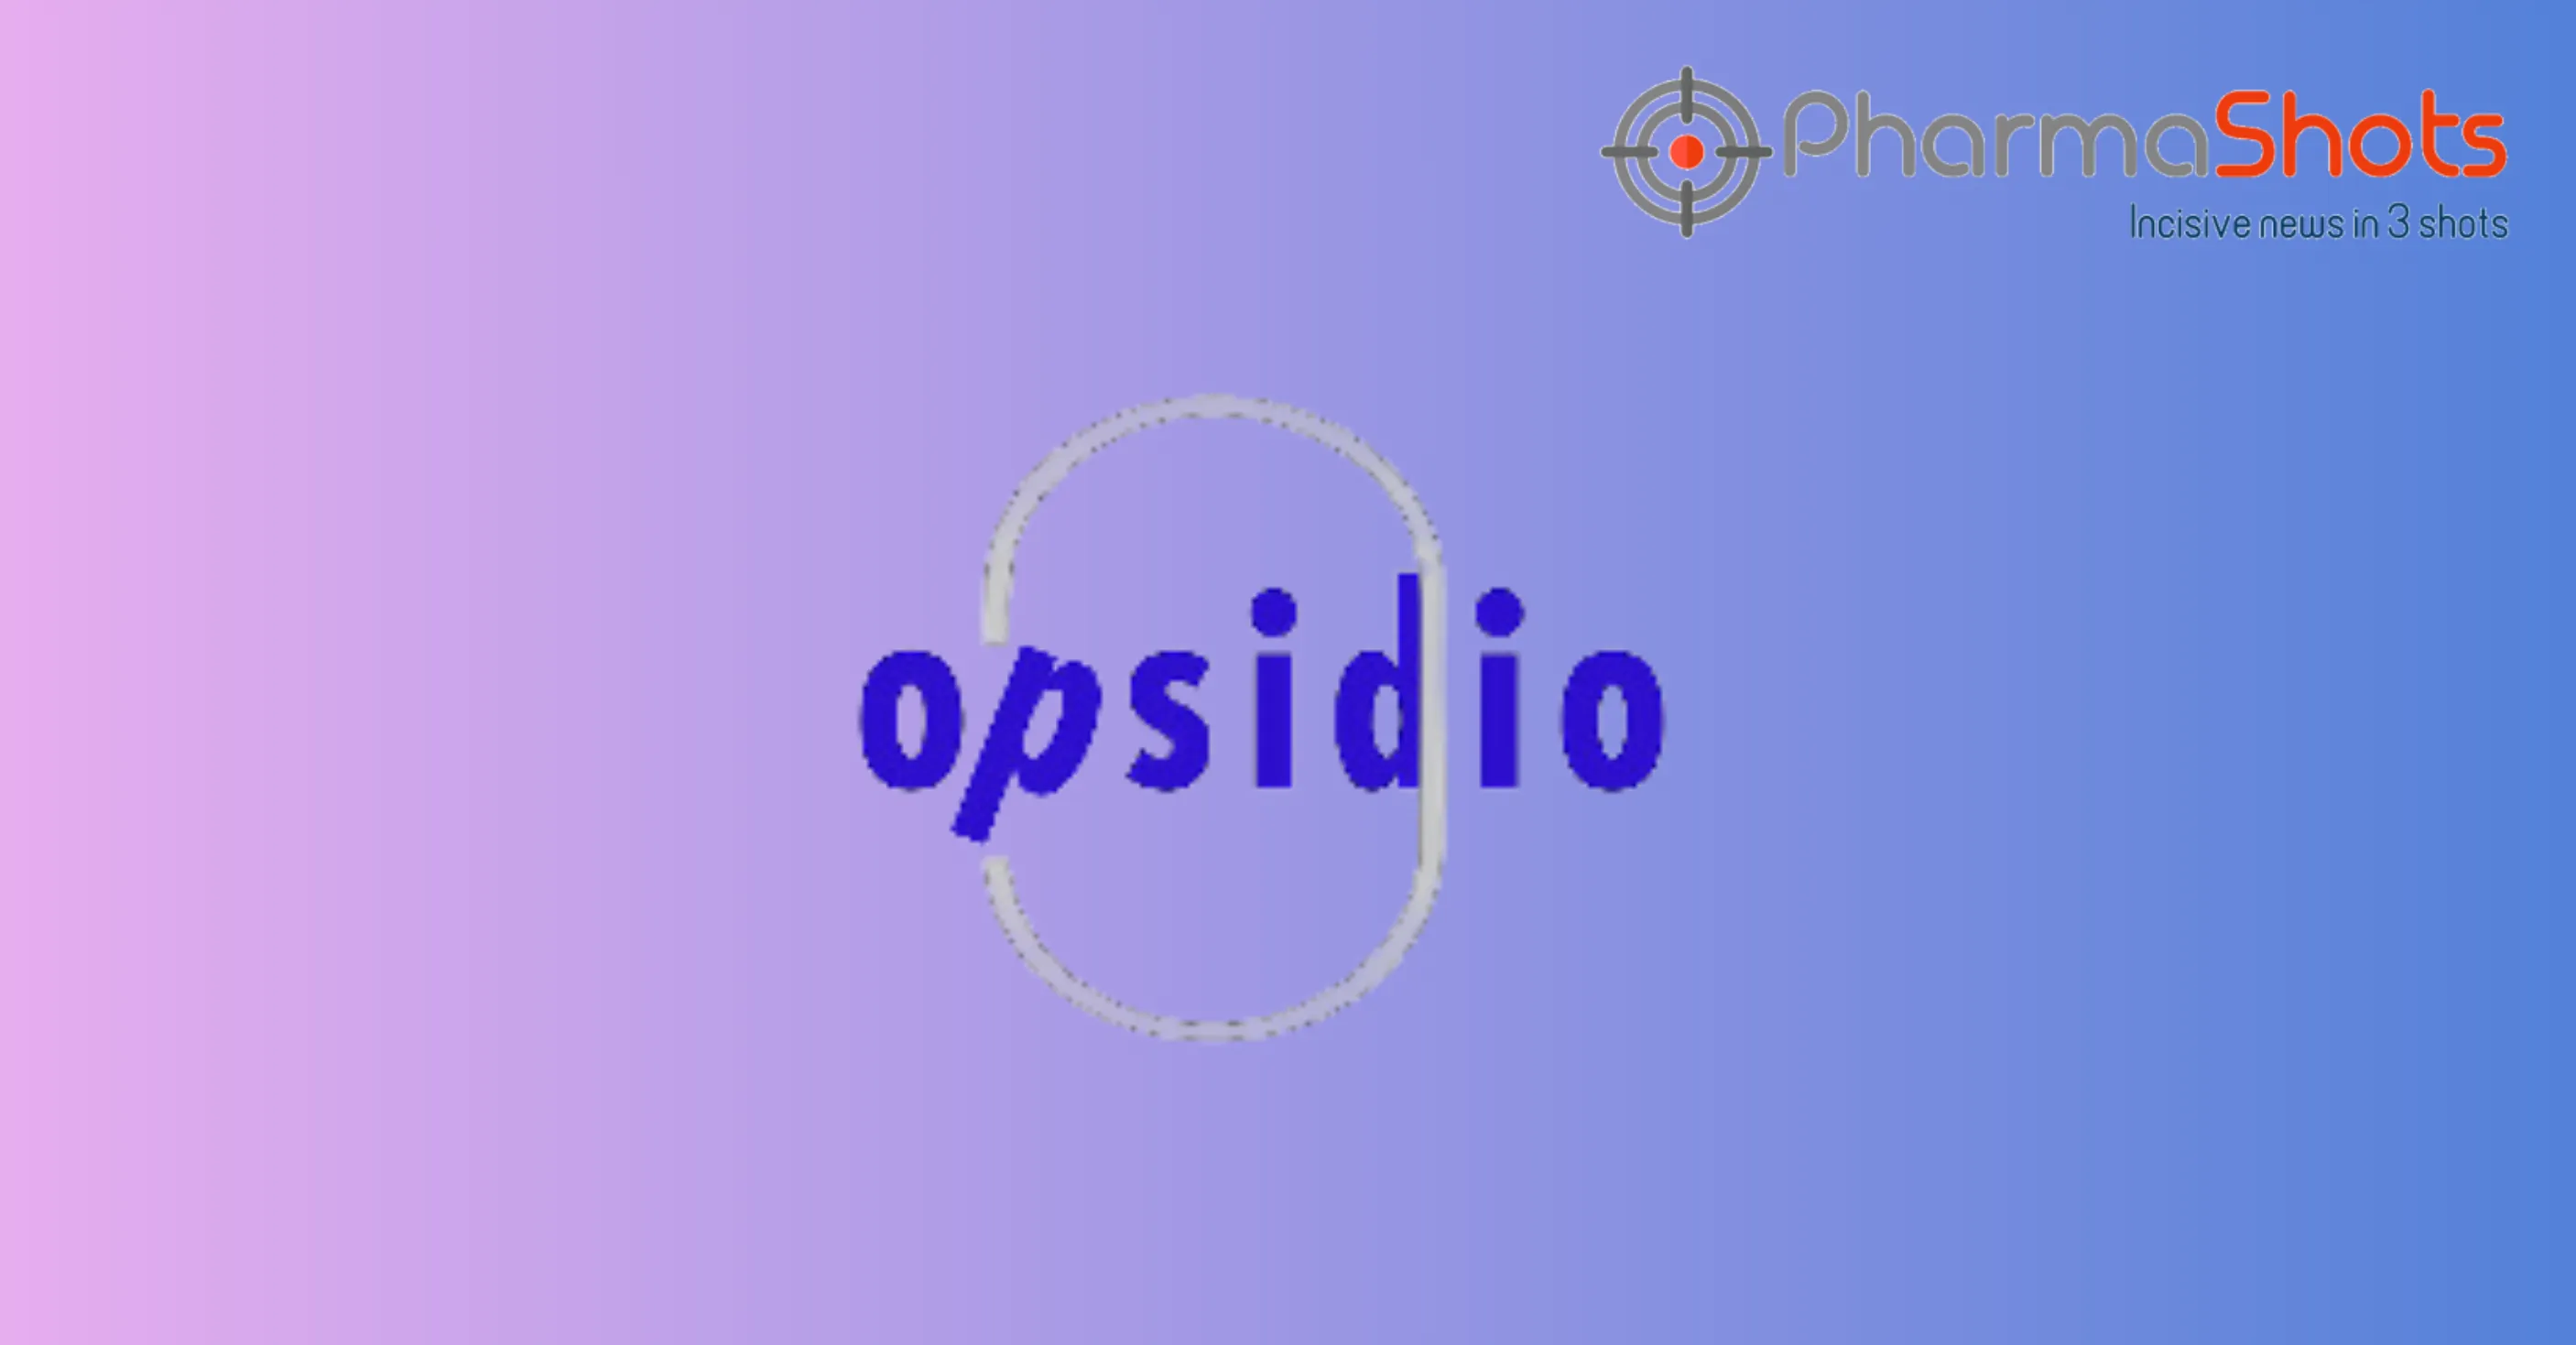 Opsidio Reports 1st Patient Dosing in P-IIa (Opscf-201) Study for the Treatment Of Atopic Dermatitis